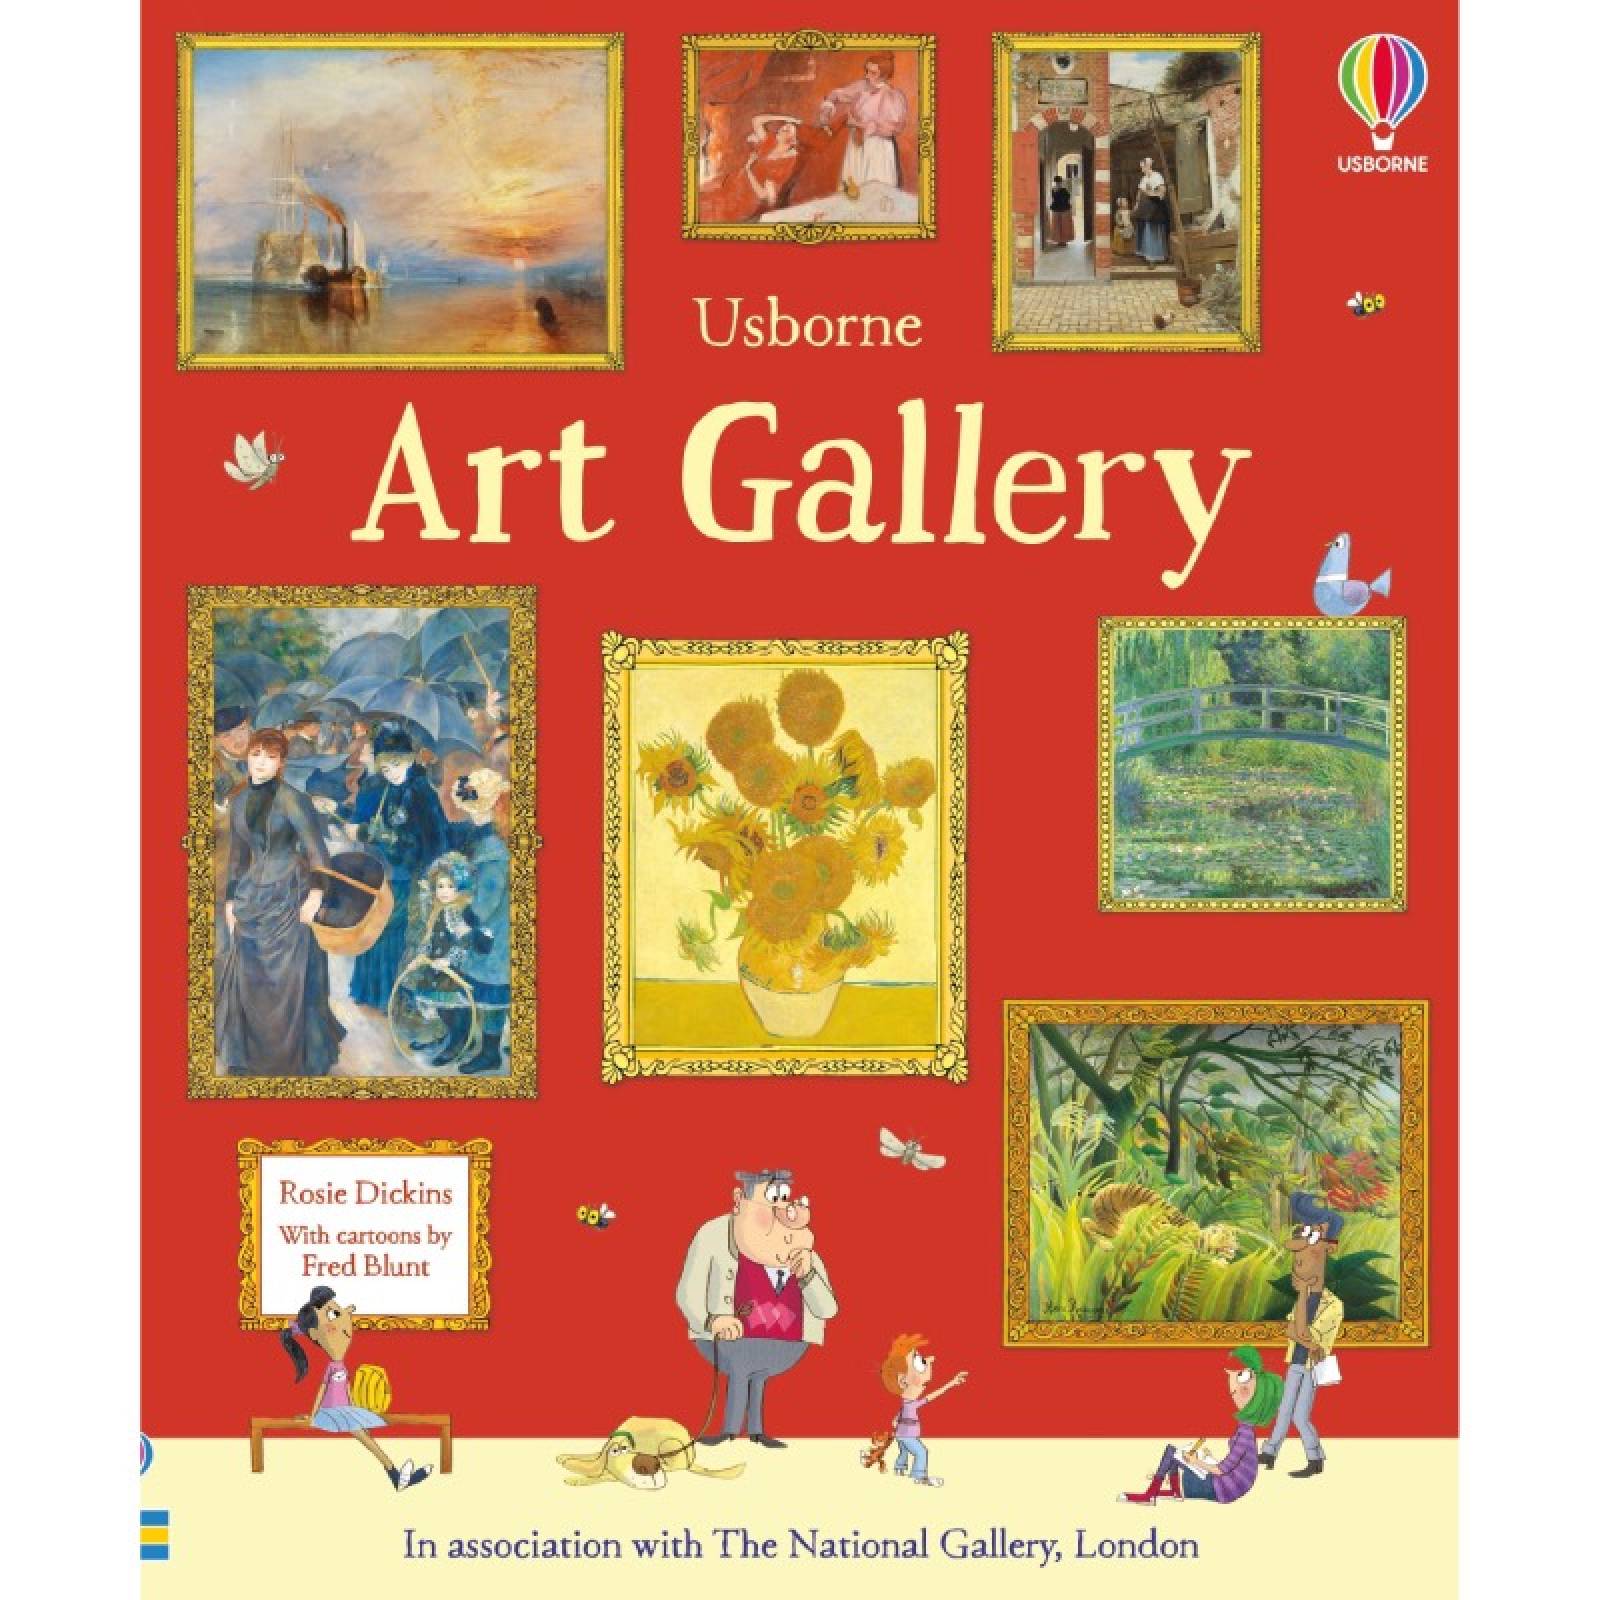 Art Gallery - 300 Piece Jigsaw Puzzle & Book thumbnails